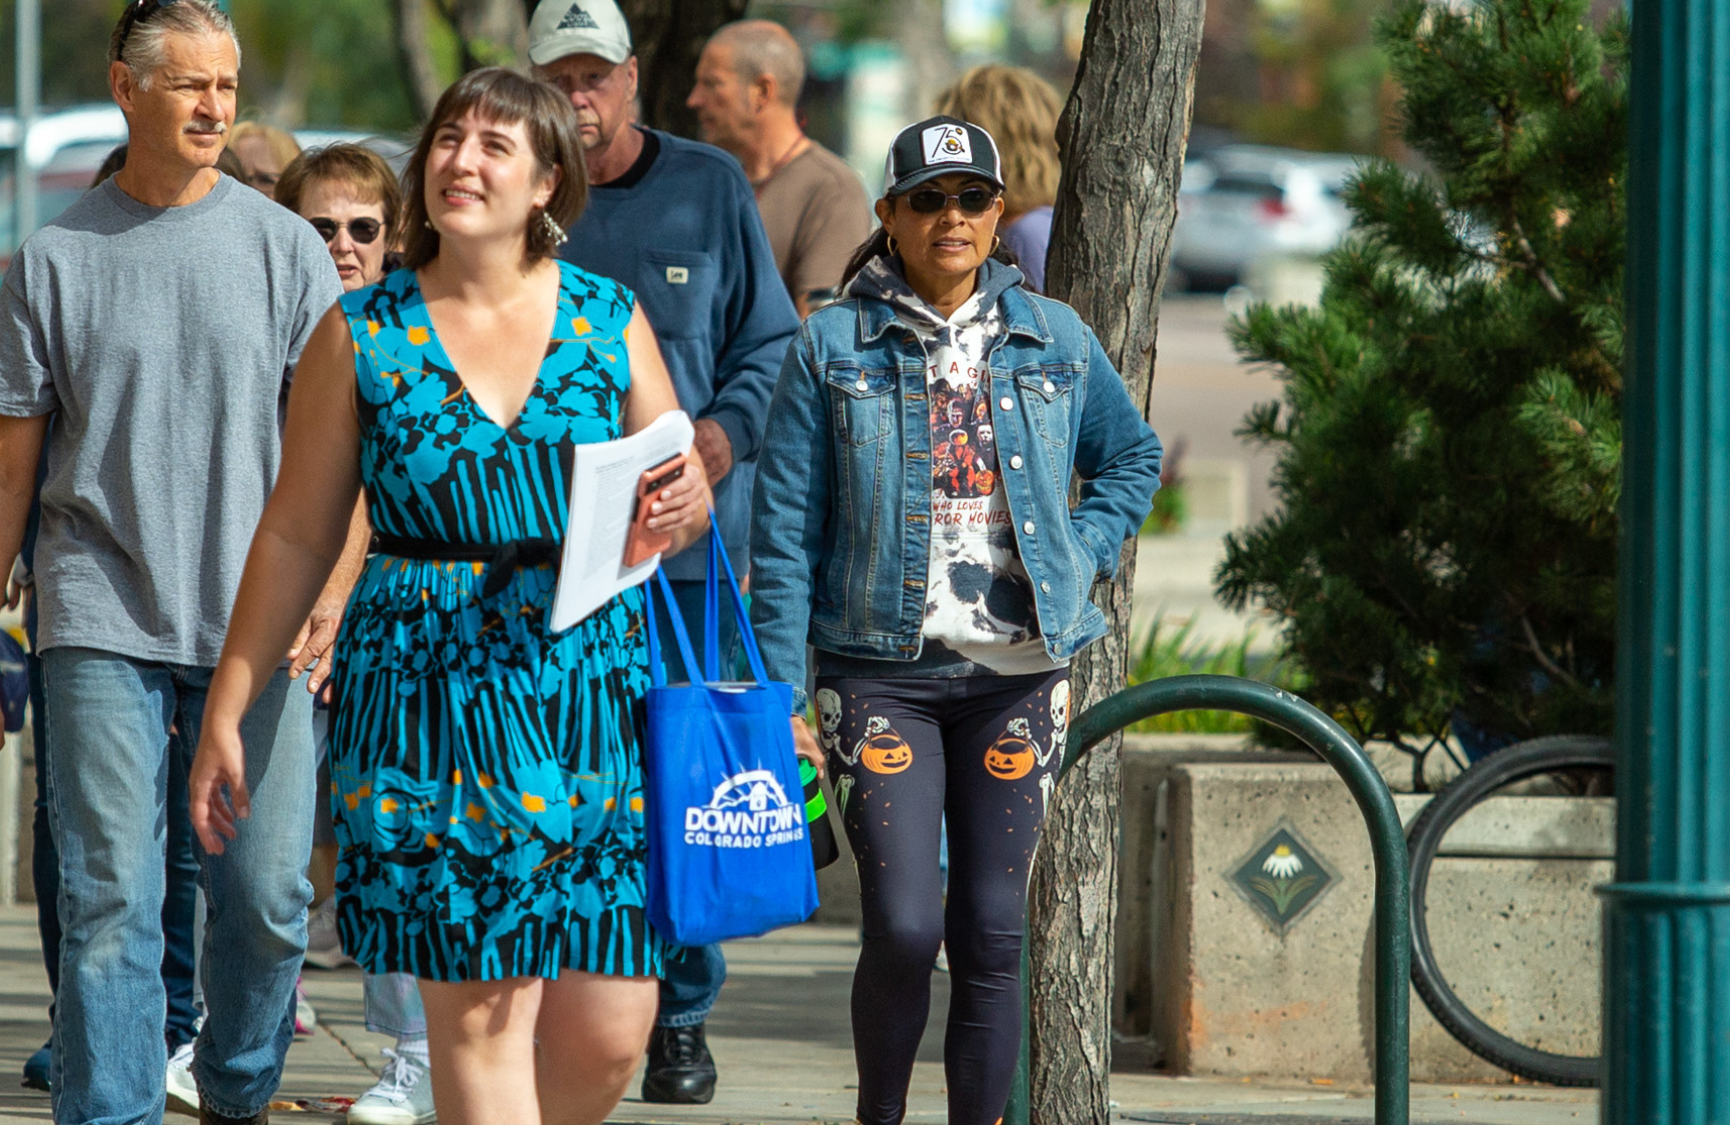 Woman leads group on walking tour through Downtown